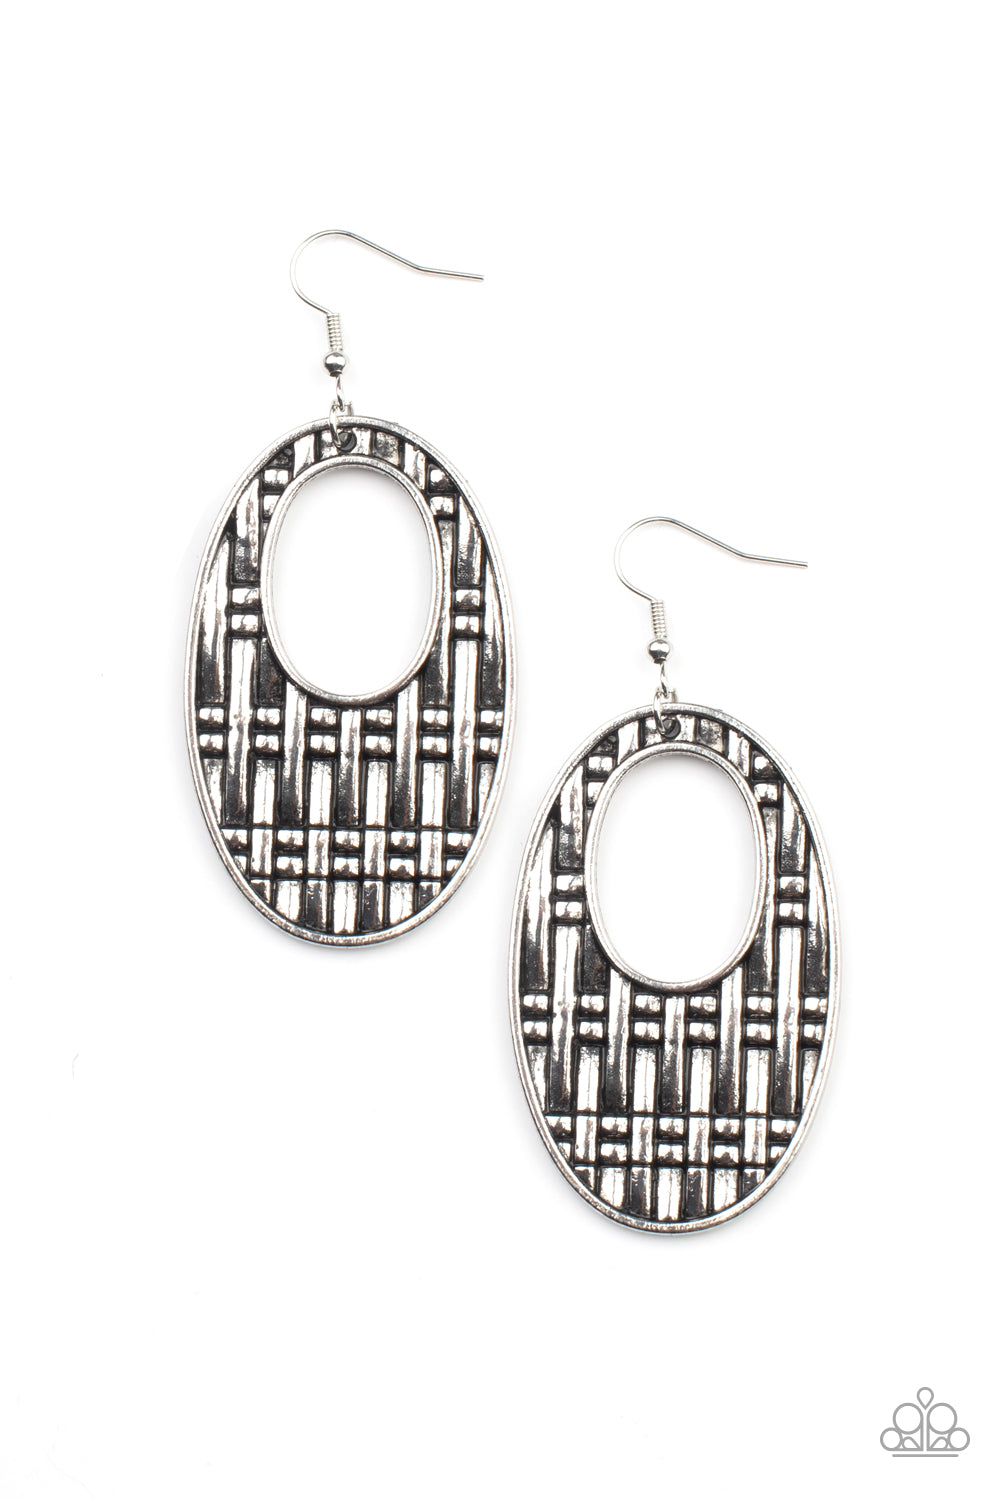 Paparazzi Accessories - Embellished Edge - Silver Earrings